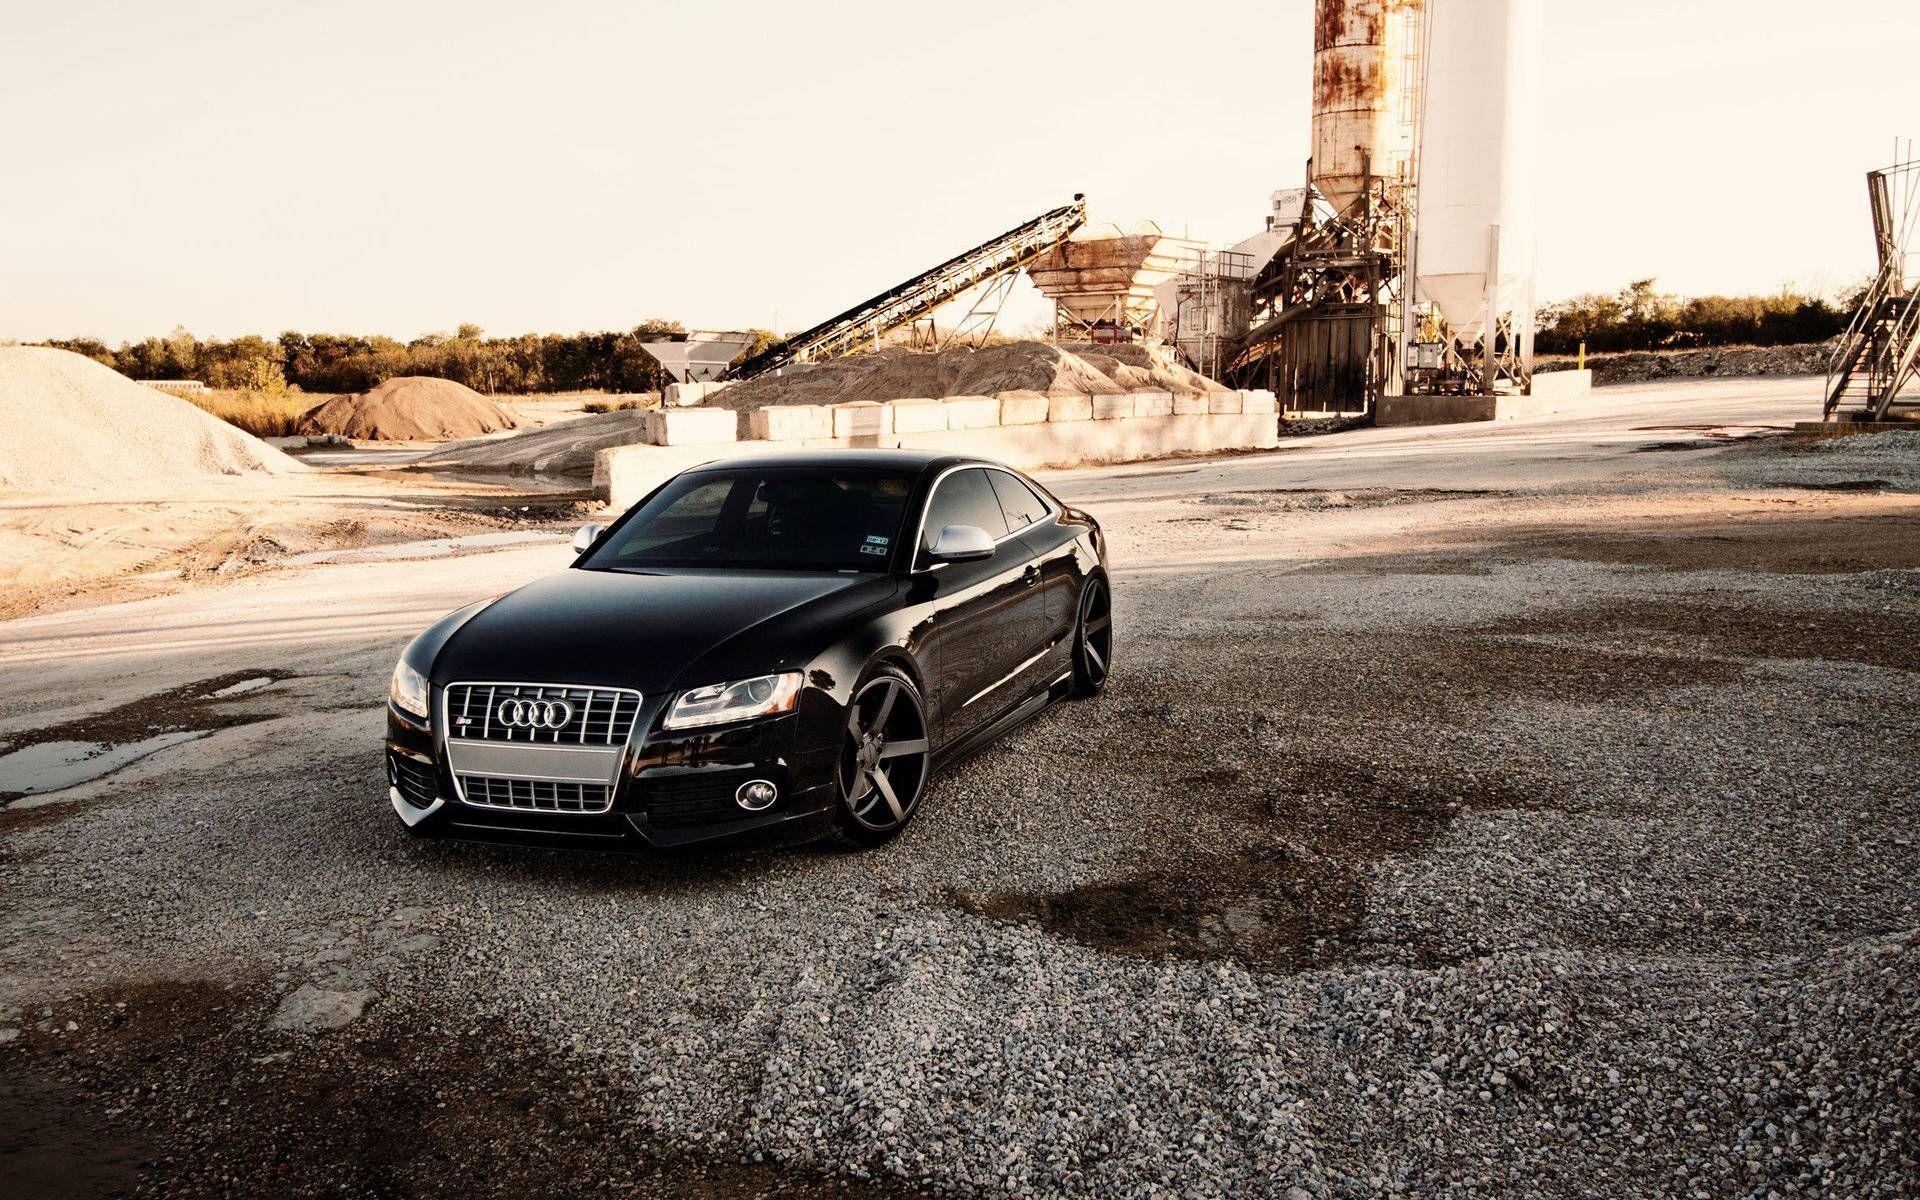 Audi S5 Wallpapers - Top Free Audi S5 Backgrounds ...